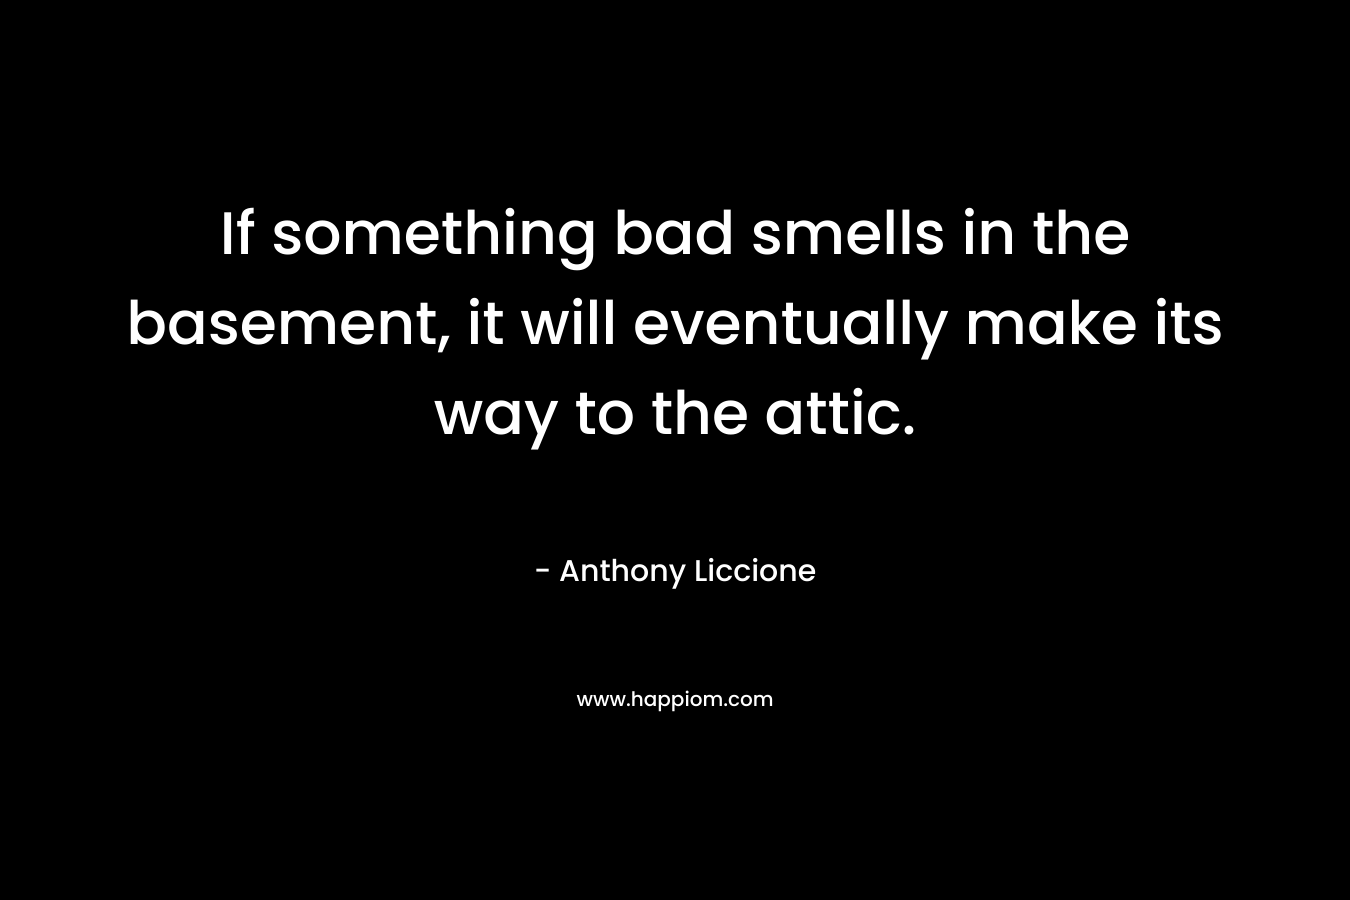 If something bad smells in the basement, it will eventually make its way to the attic. – Anthony Liccione